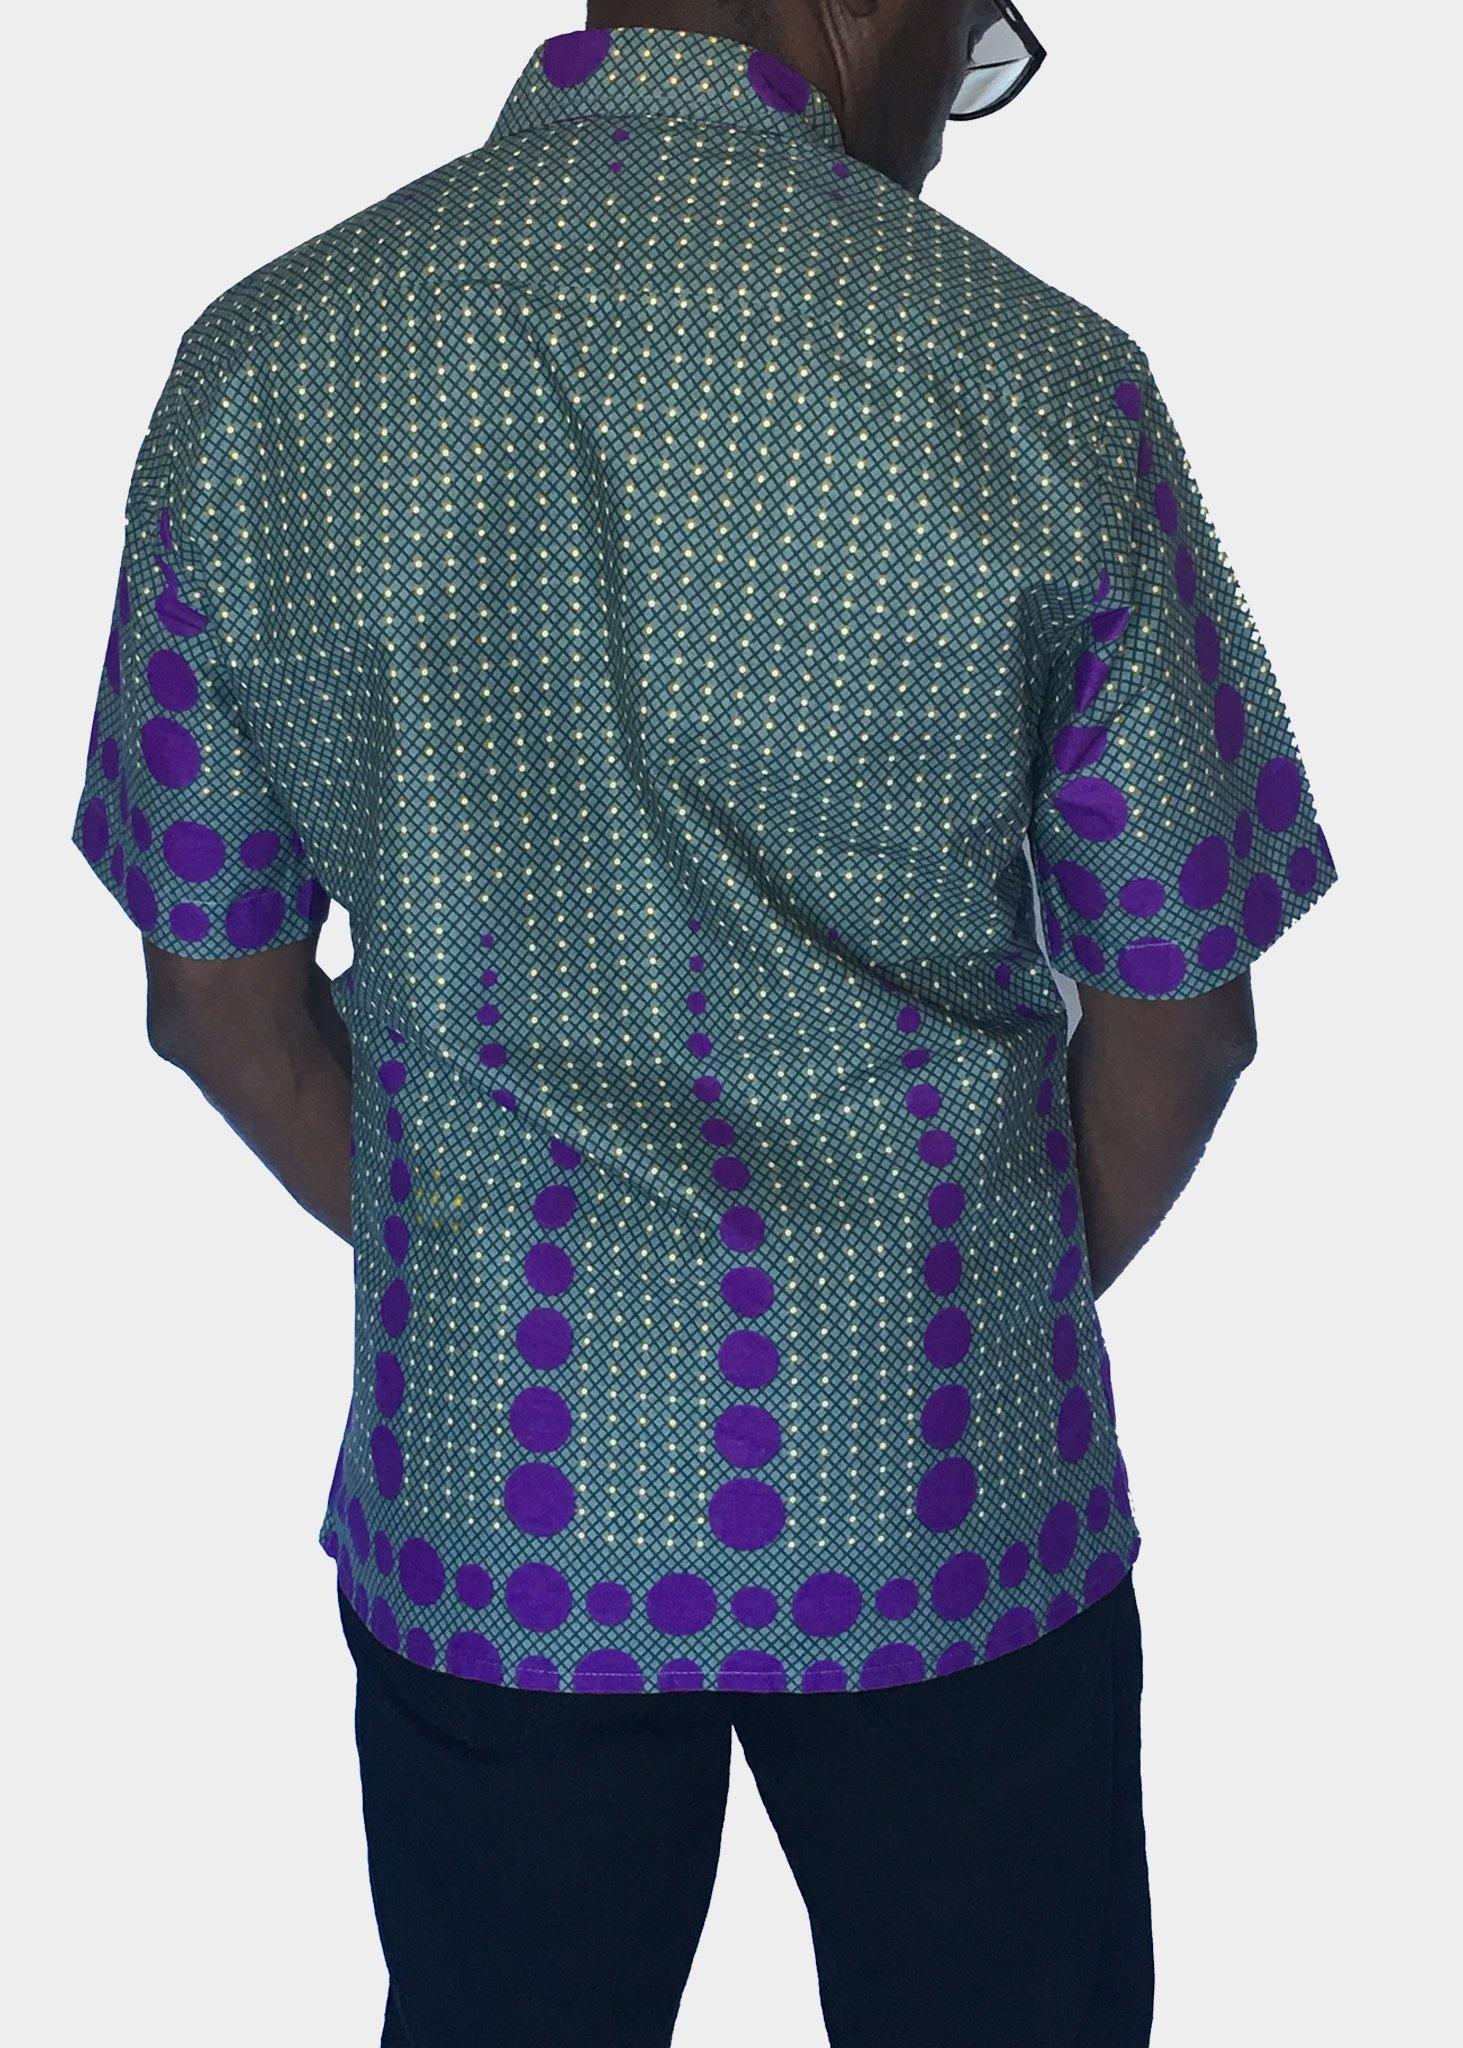 African Print Shirt Fitted Purple Dots Short Sleeves - Contemporary and Colorful Ensemble-African apparel and accessories